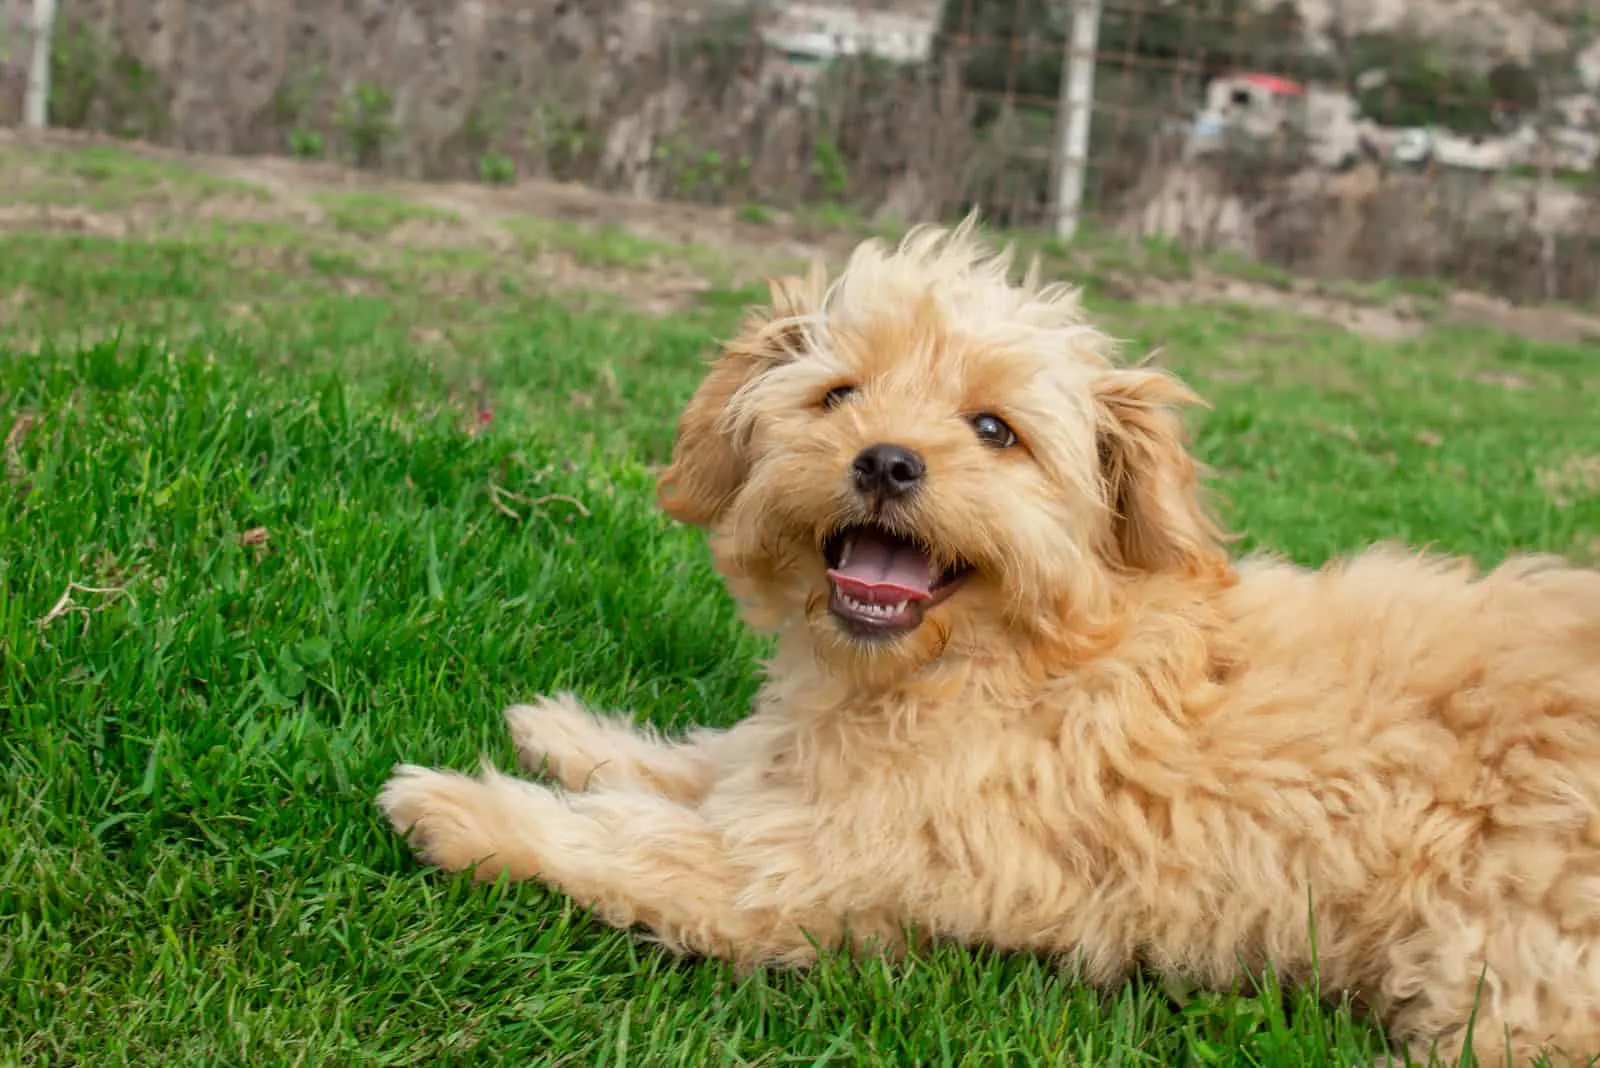 A mini goldendoodle dog lies on the grass